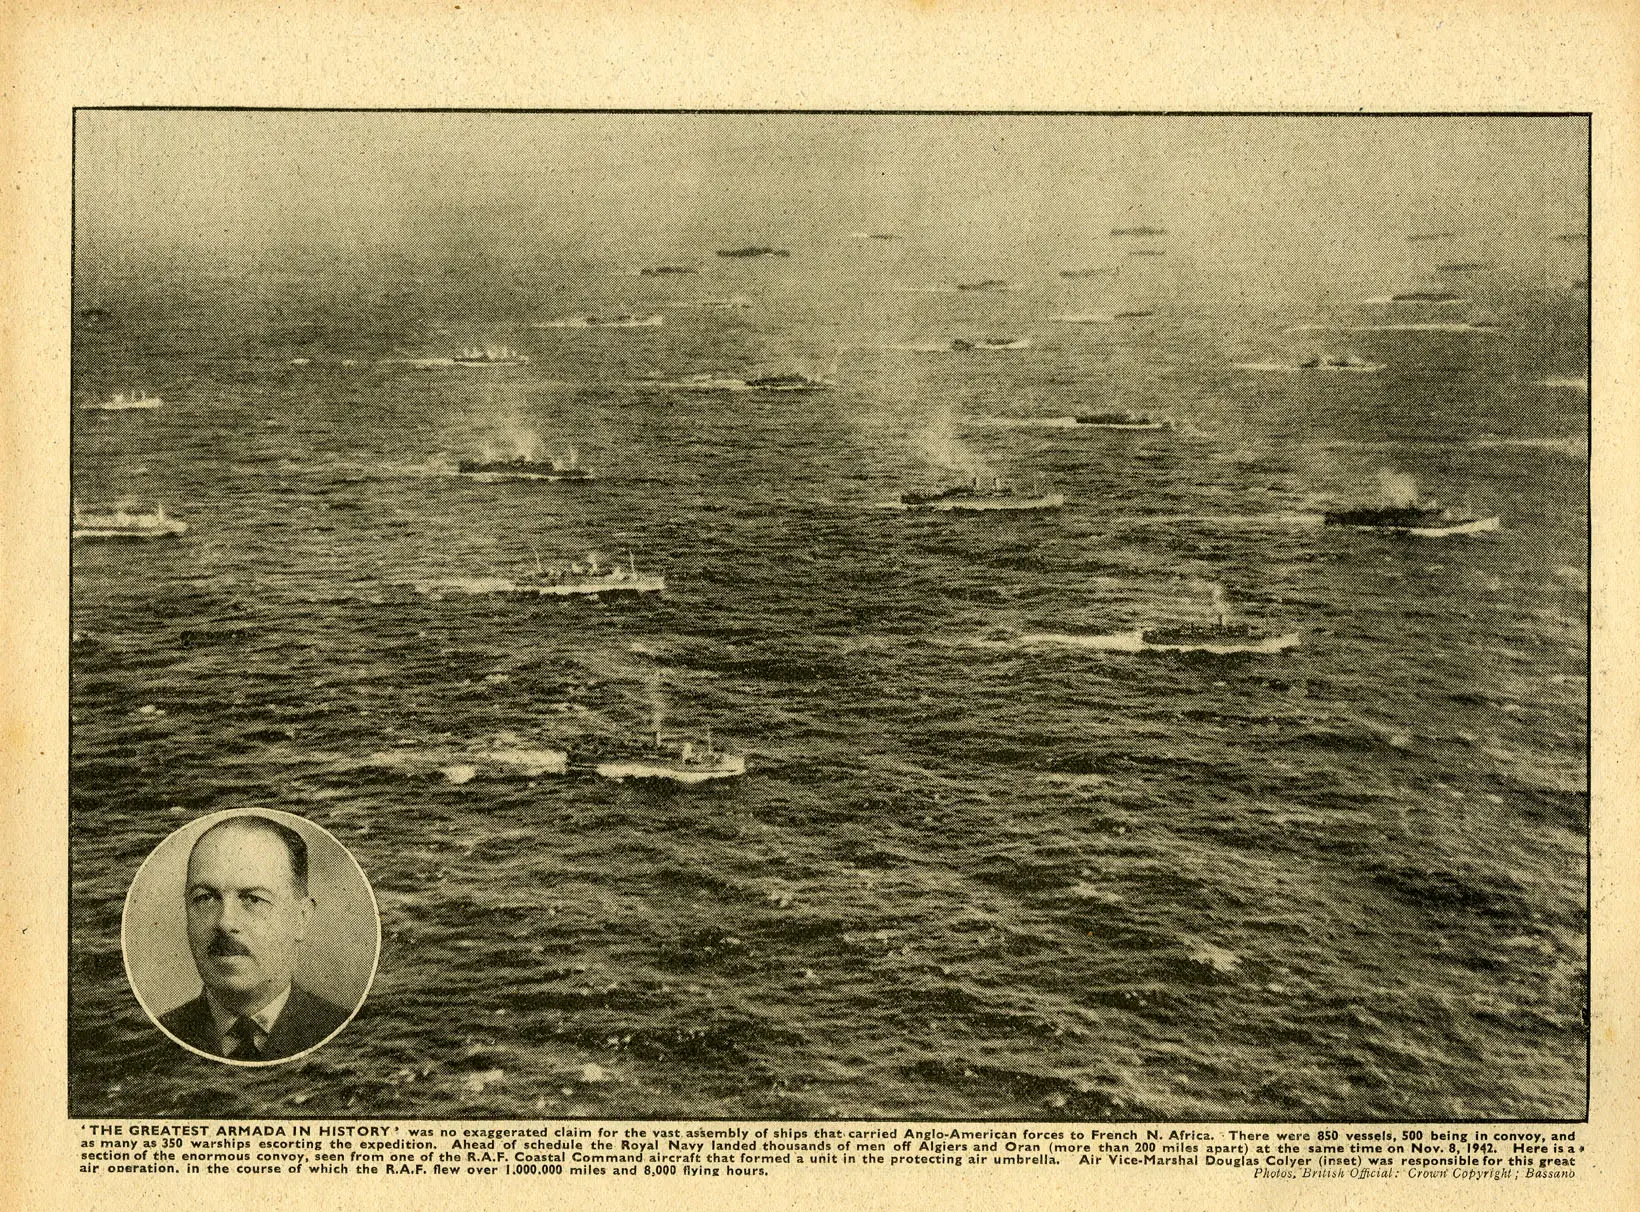 A page of The War Illustrated showing a full page aerial photograph of dozens of ships steaming in open waters. The ships are neatly organized into columns and packed closely together. There is a small portait of a man in the bottom left corner.